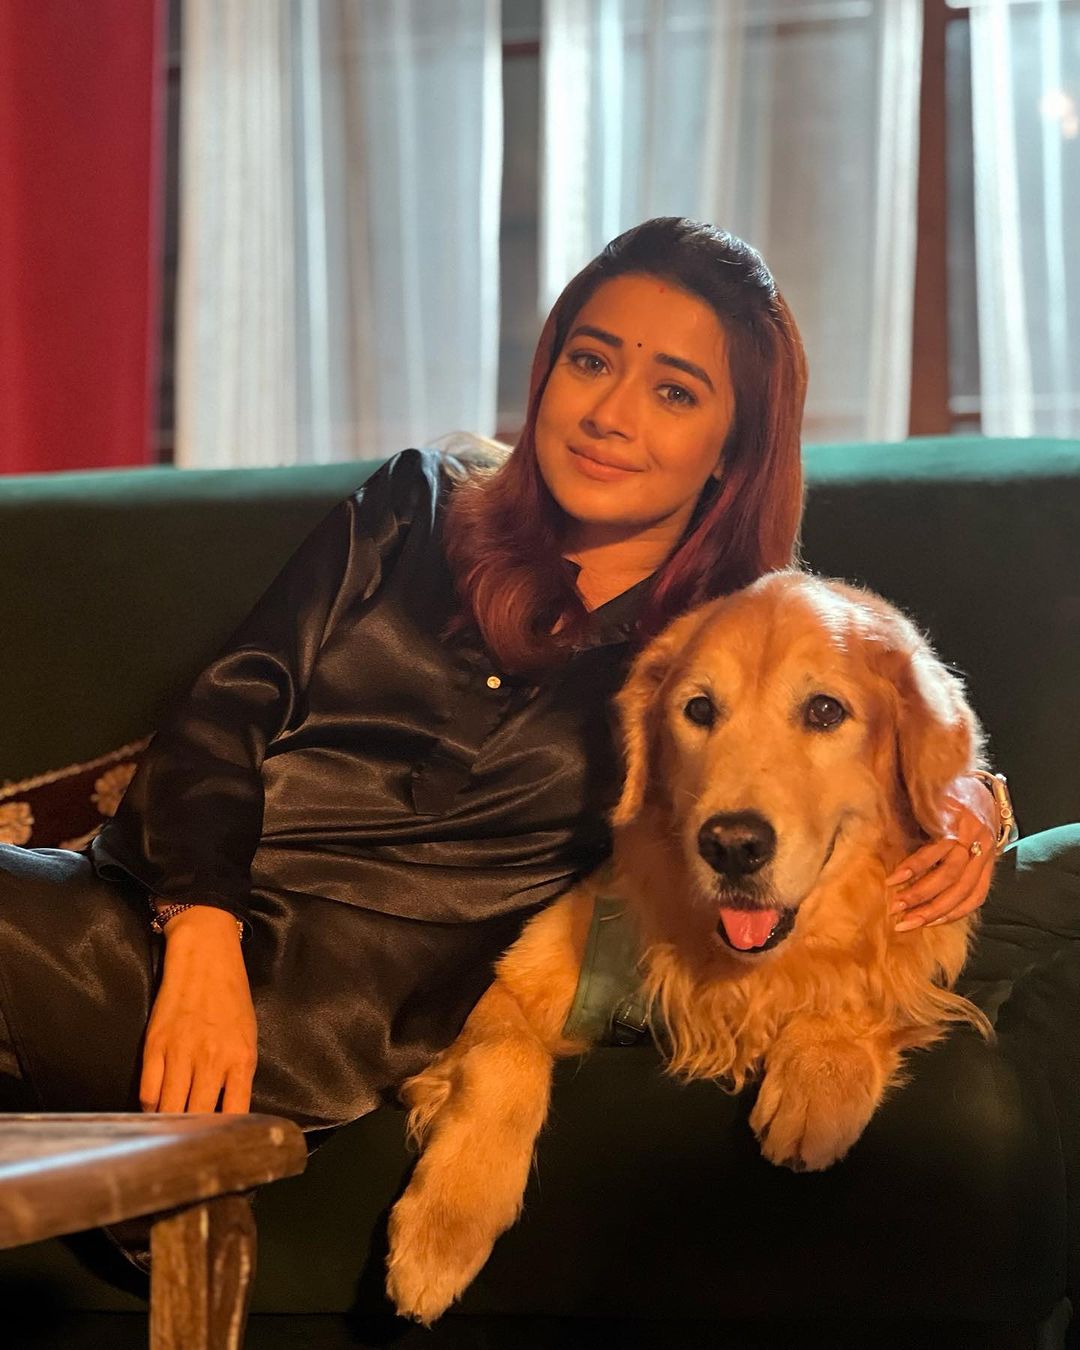 Gorgeous Actress Tina Datta Shared Pictures Of Her Recent Trip From Mumbai To Kolkata. She Seems Travel In Train With Her Pet!